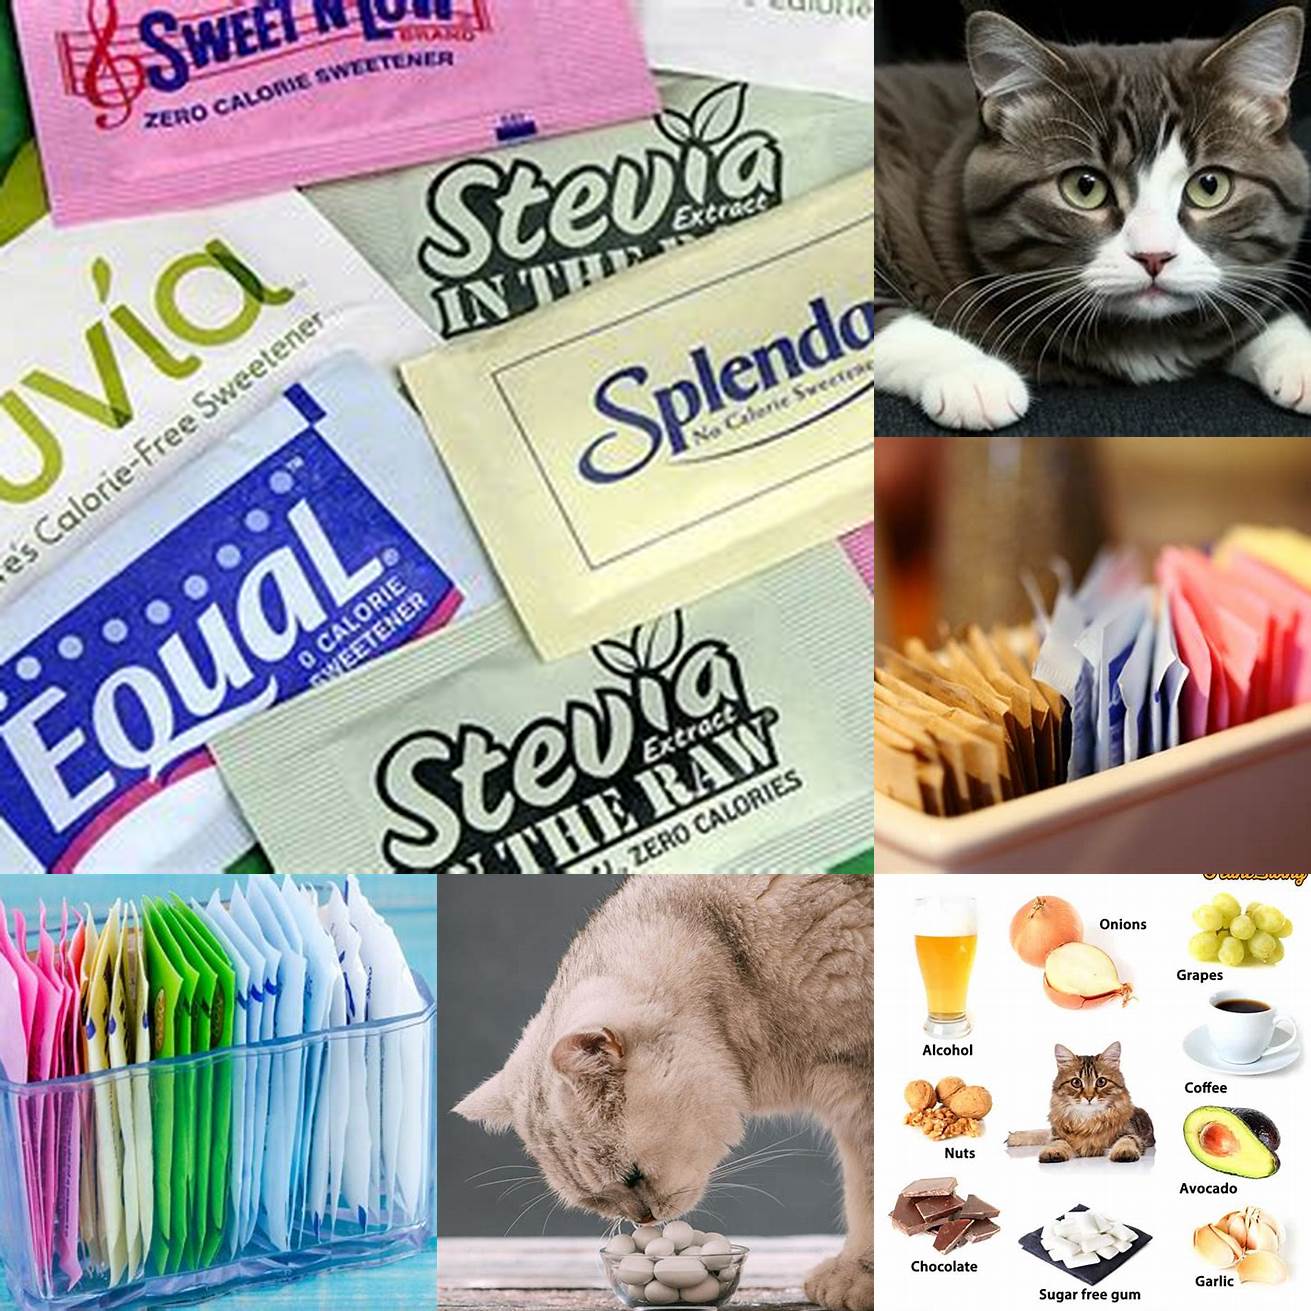 Waffles often contain artificial sweeteners which can be toxic to cats